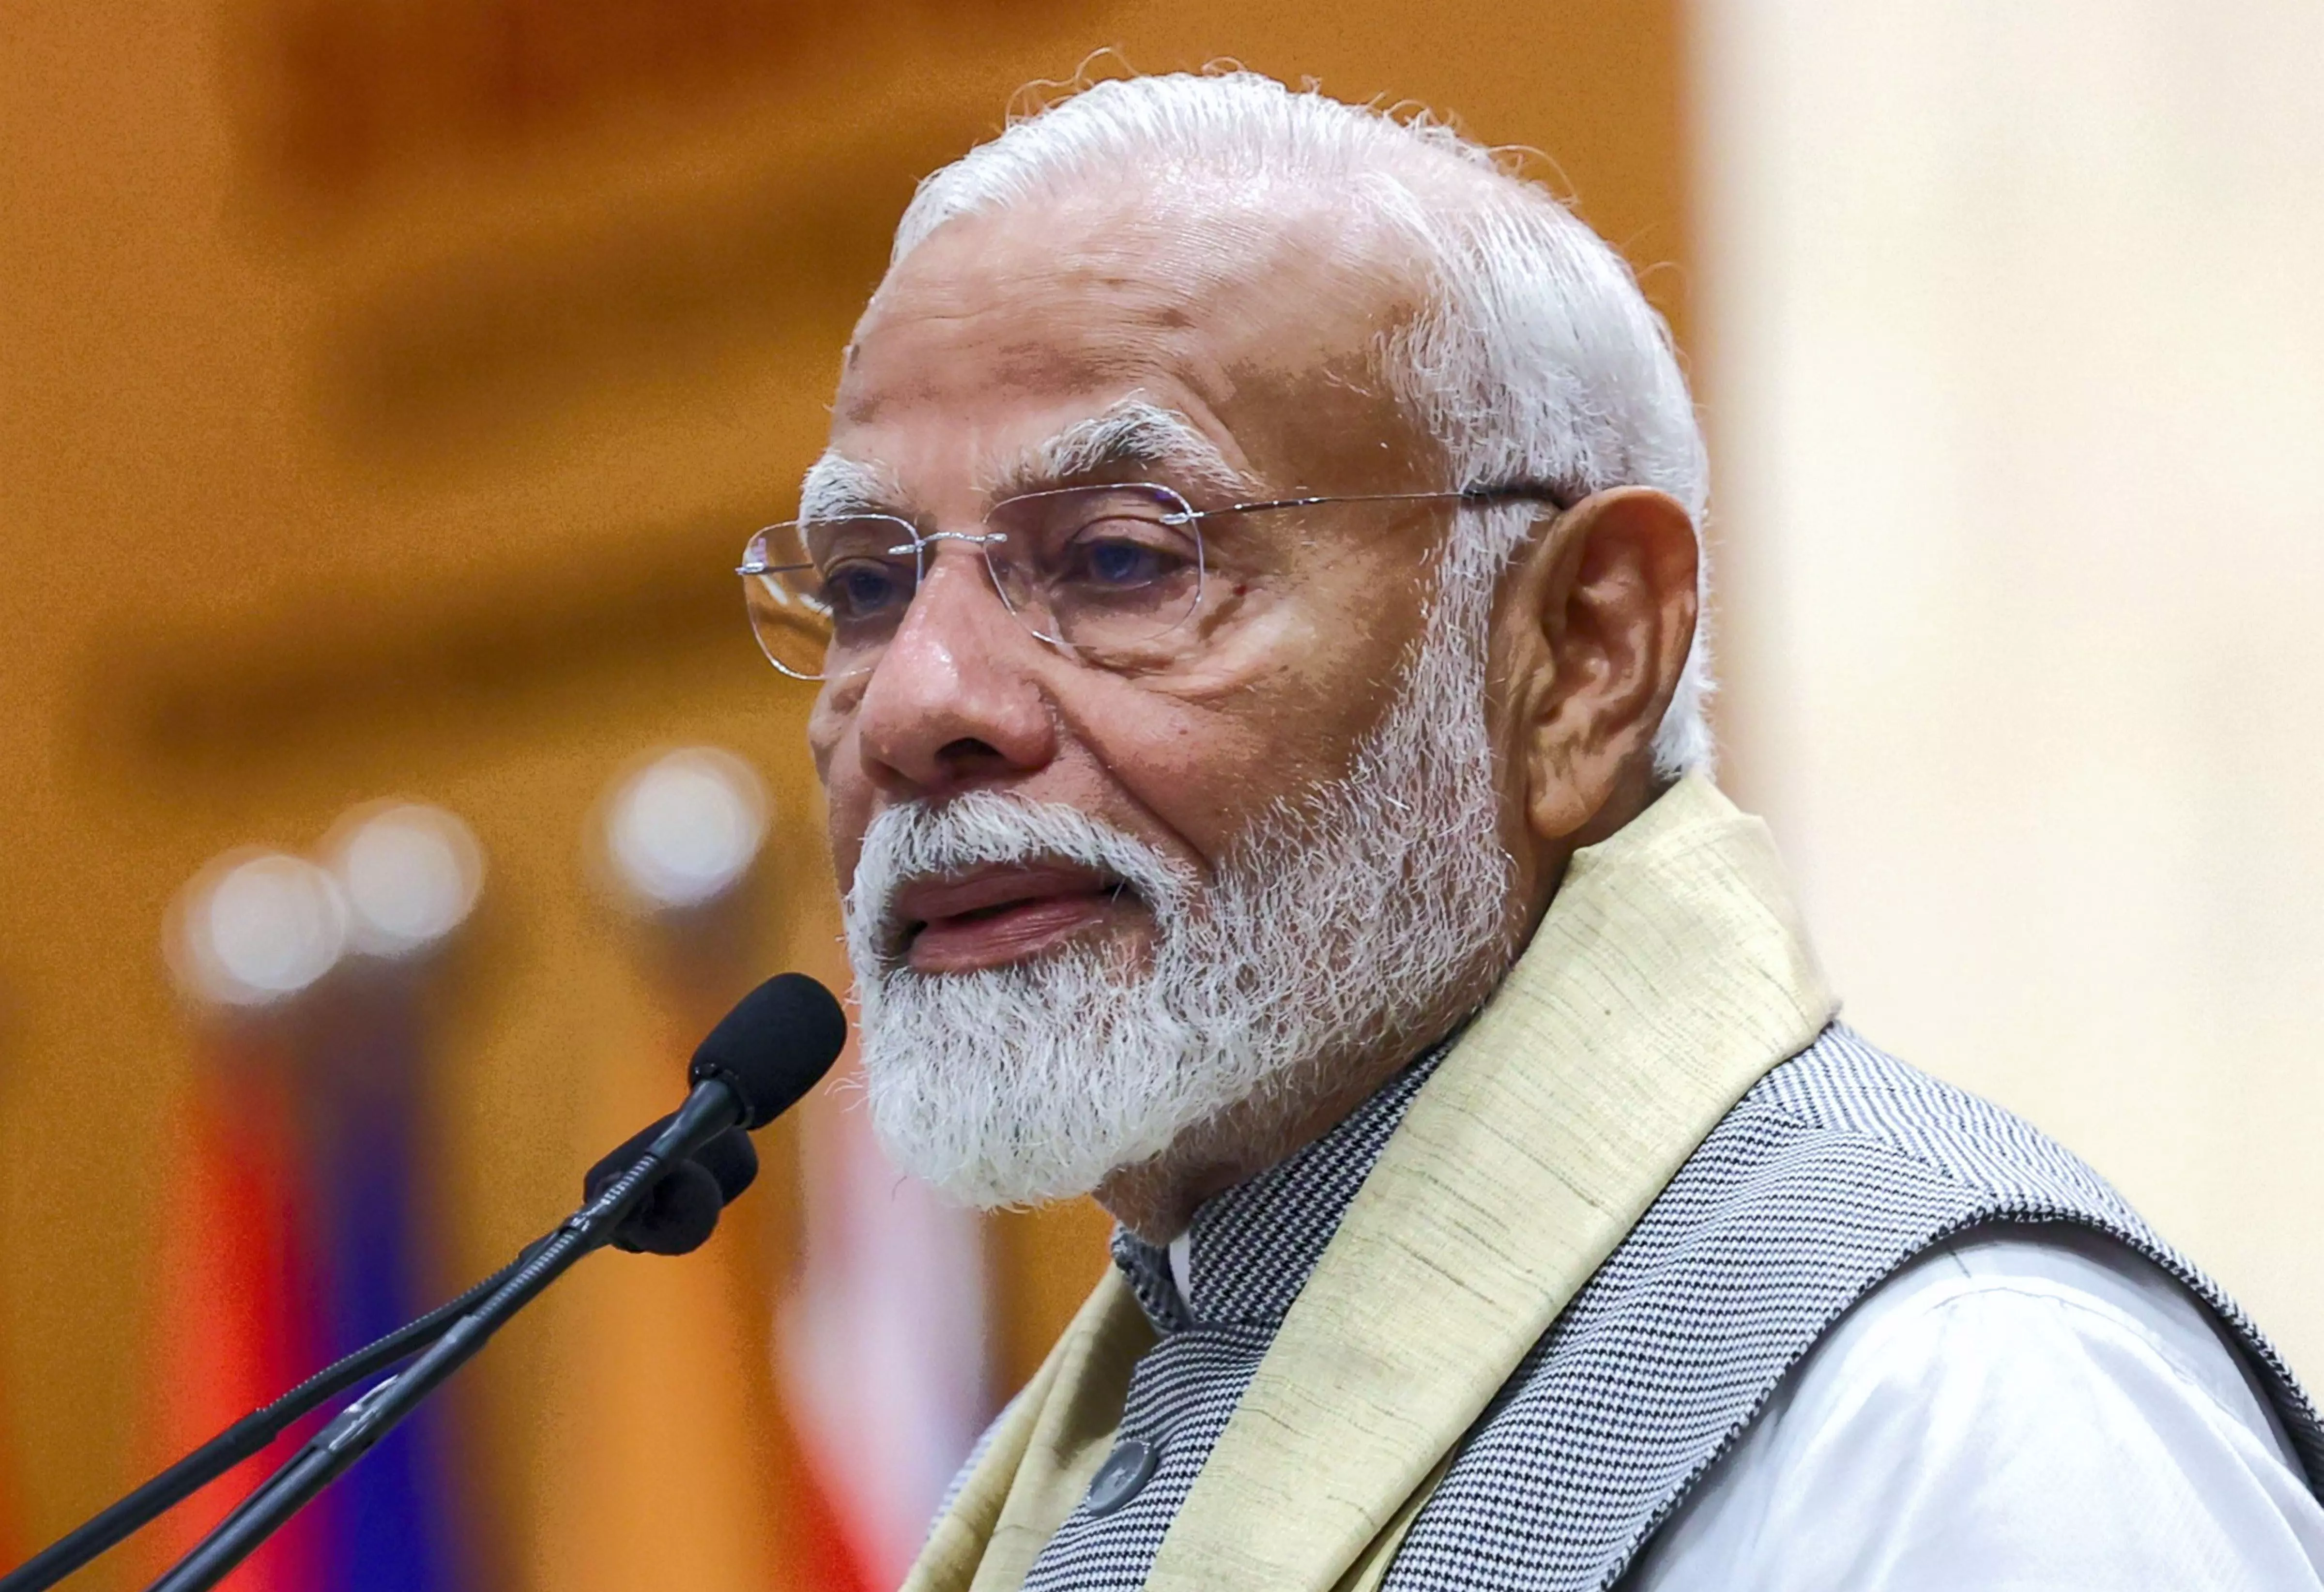 Sunil Gatade | Modi 3.0 could prove to be challenging, tiring for PM